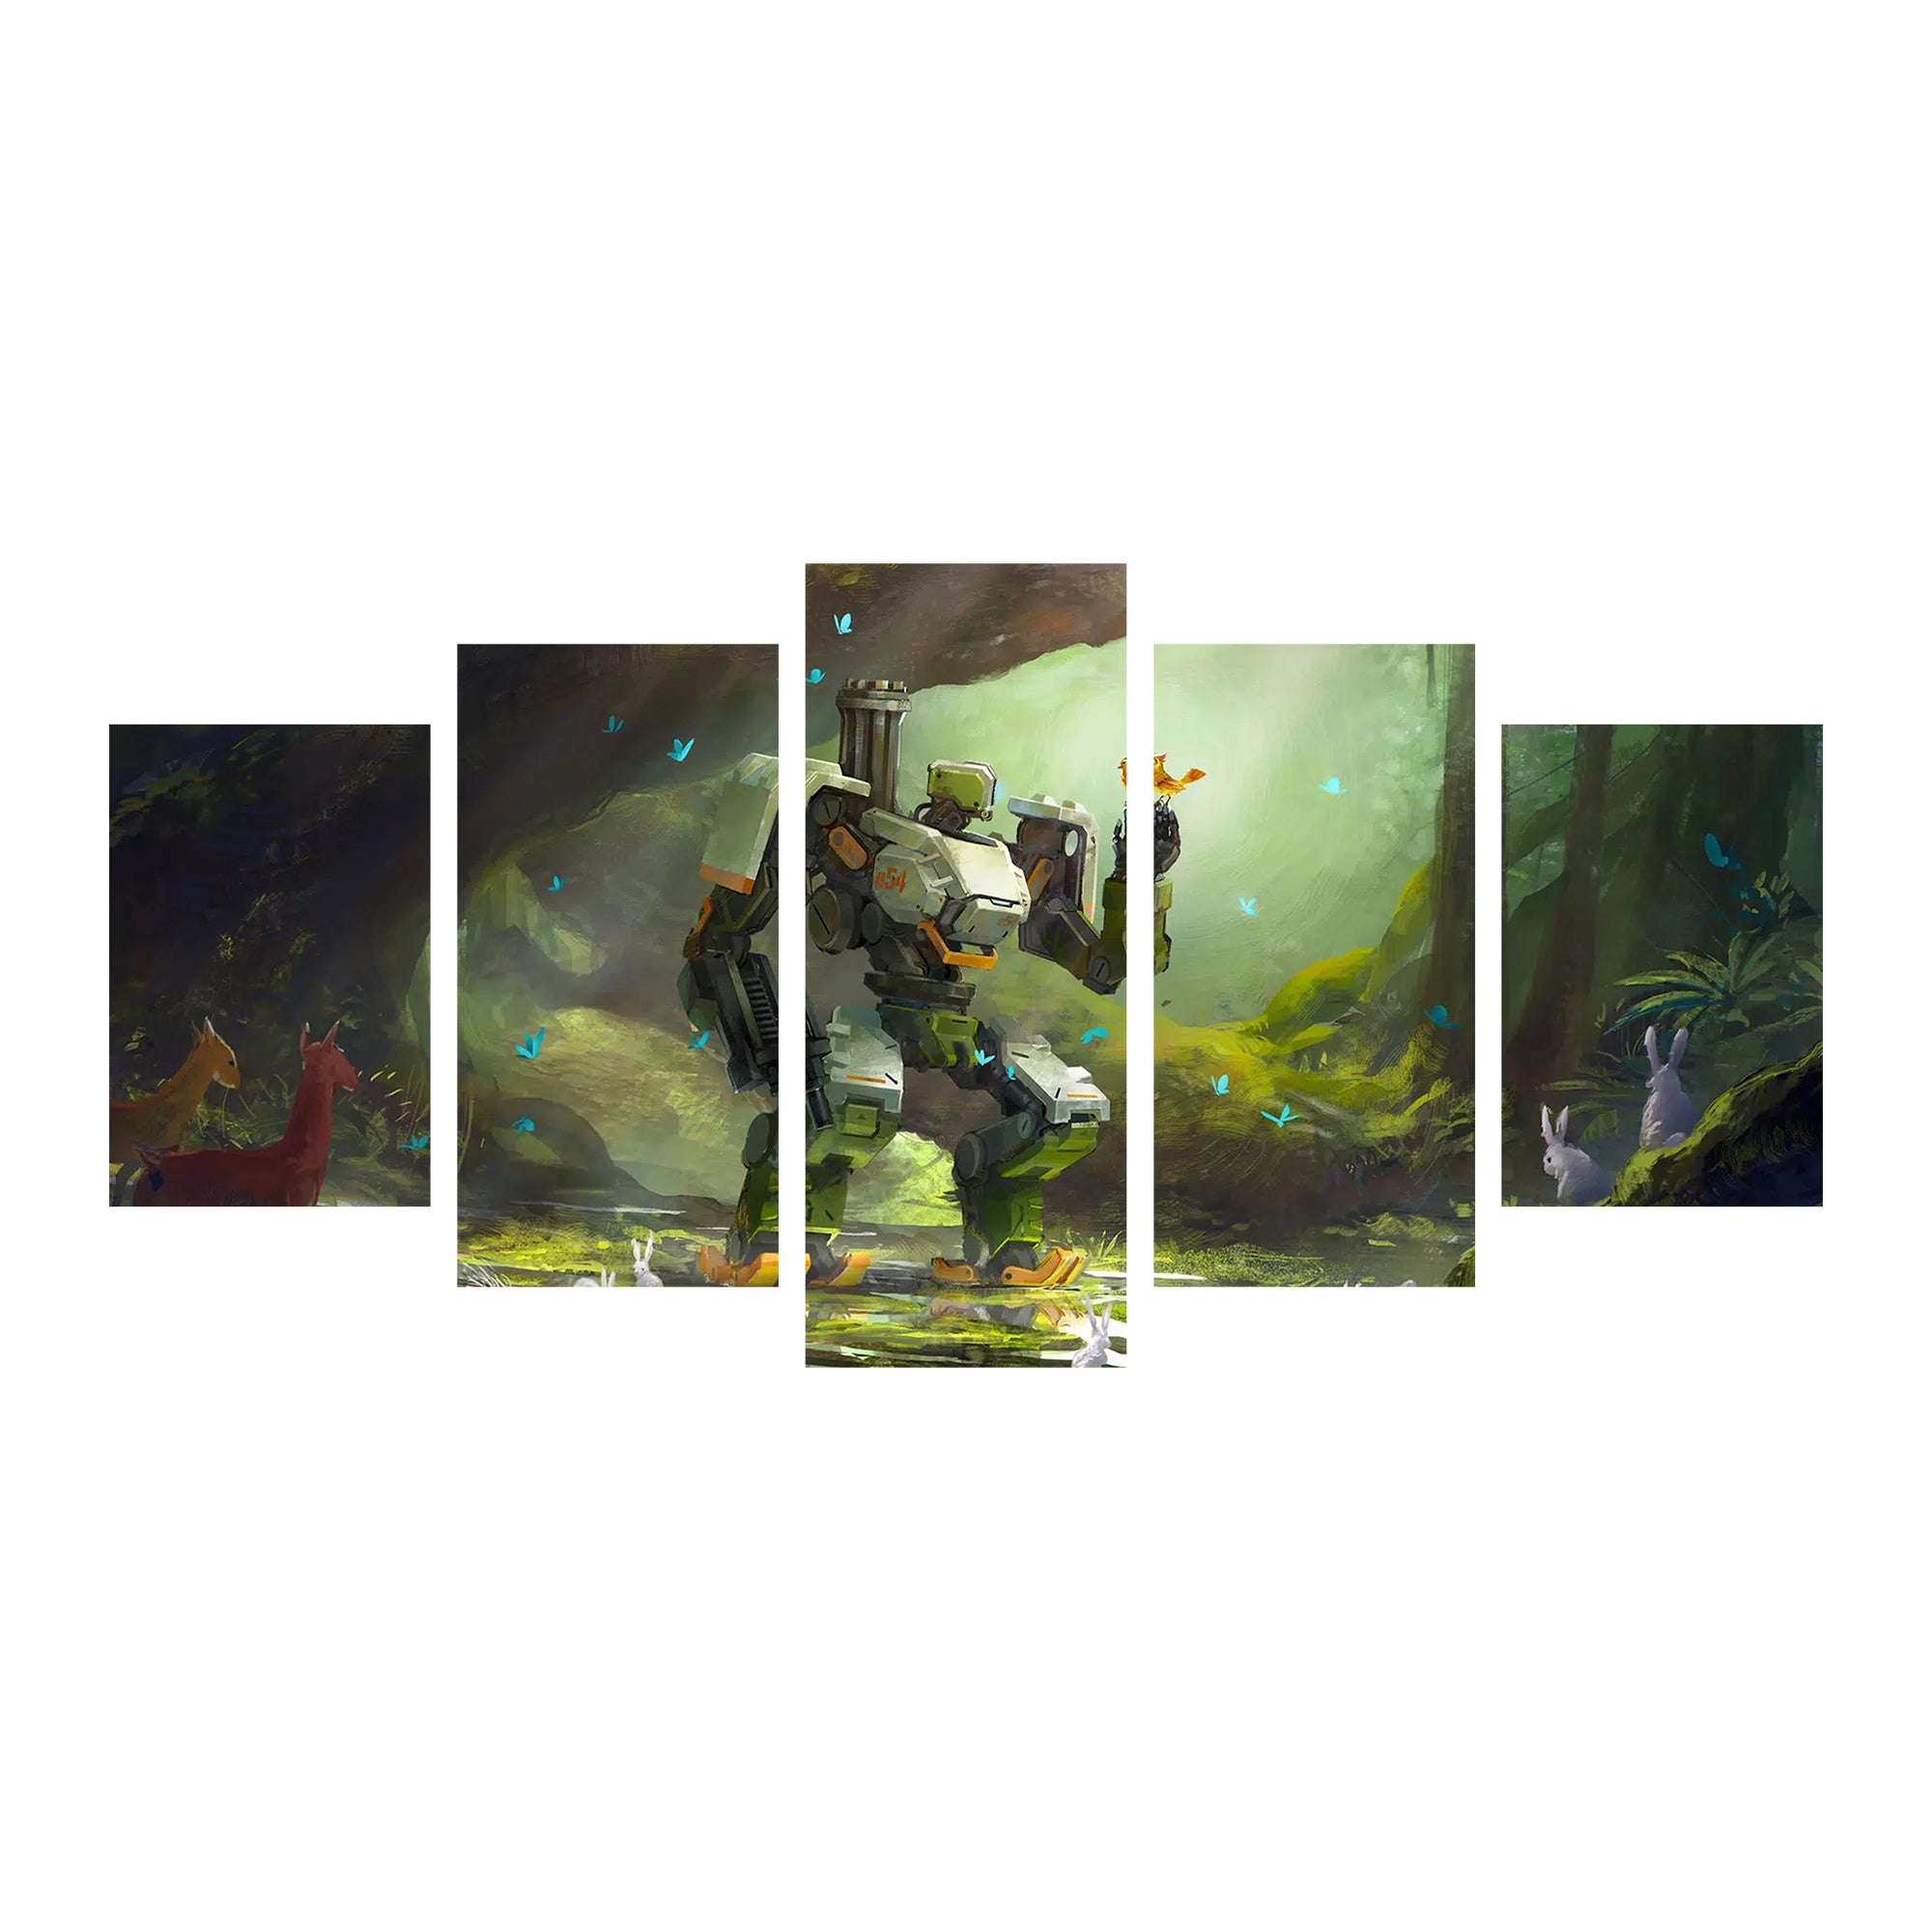 Captivating Bastion Canvas Art: Durable, Unique, and Ready to Hang